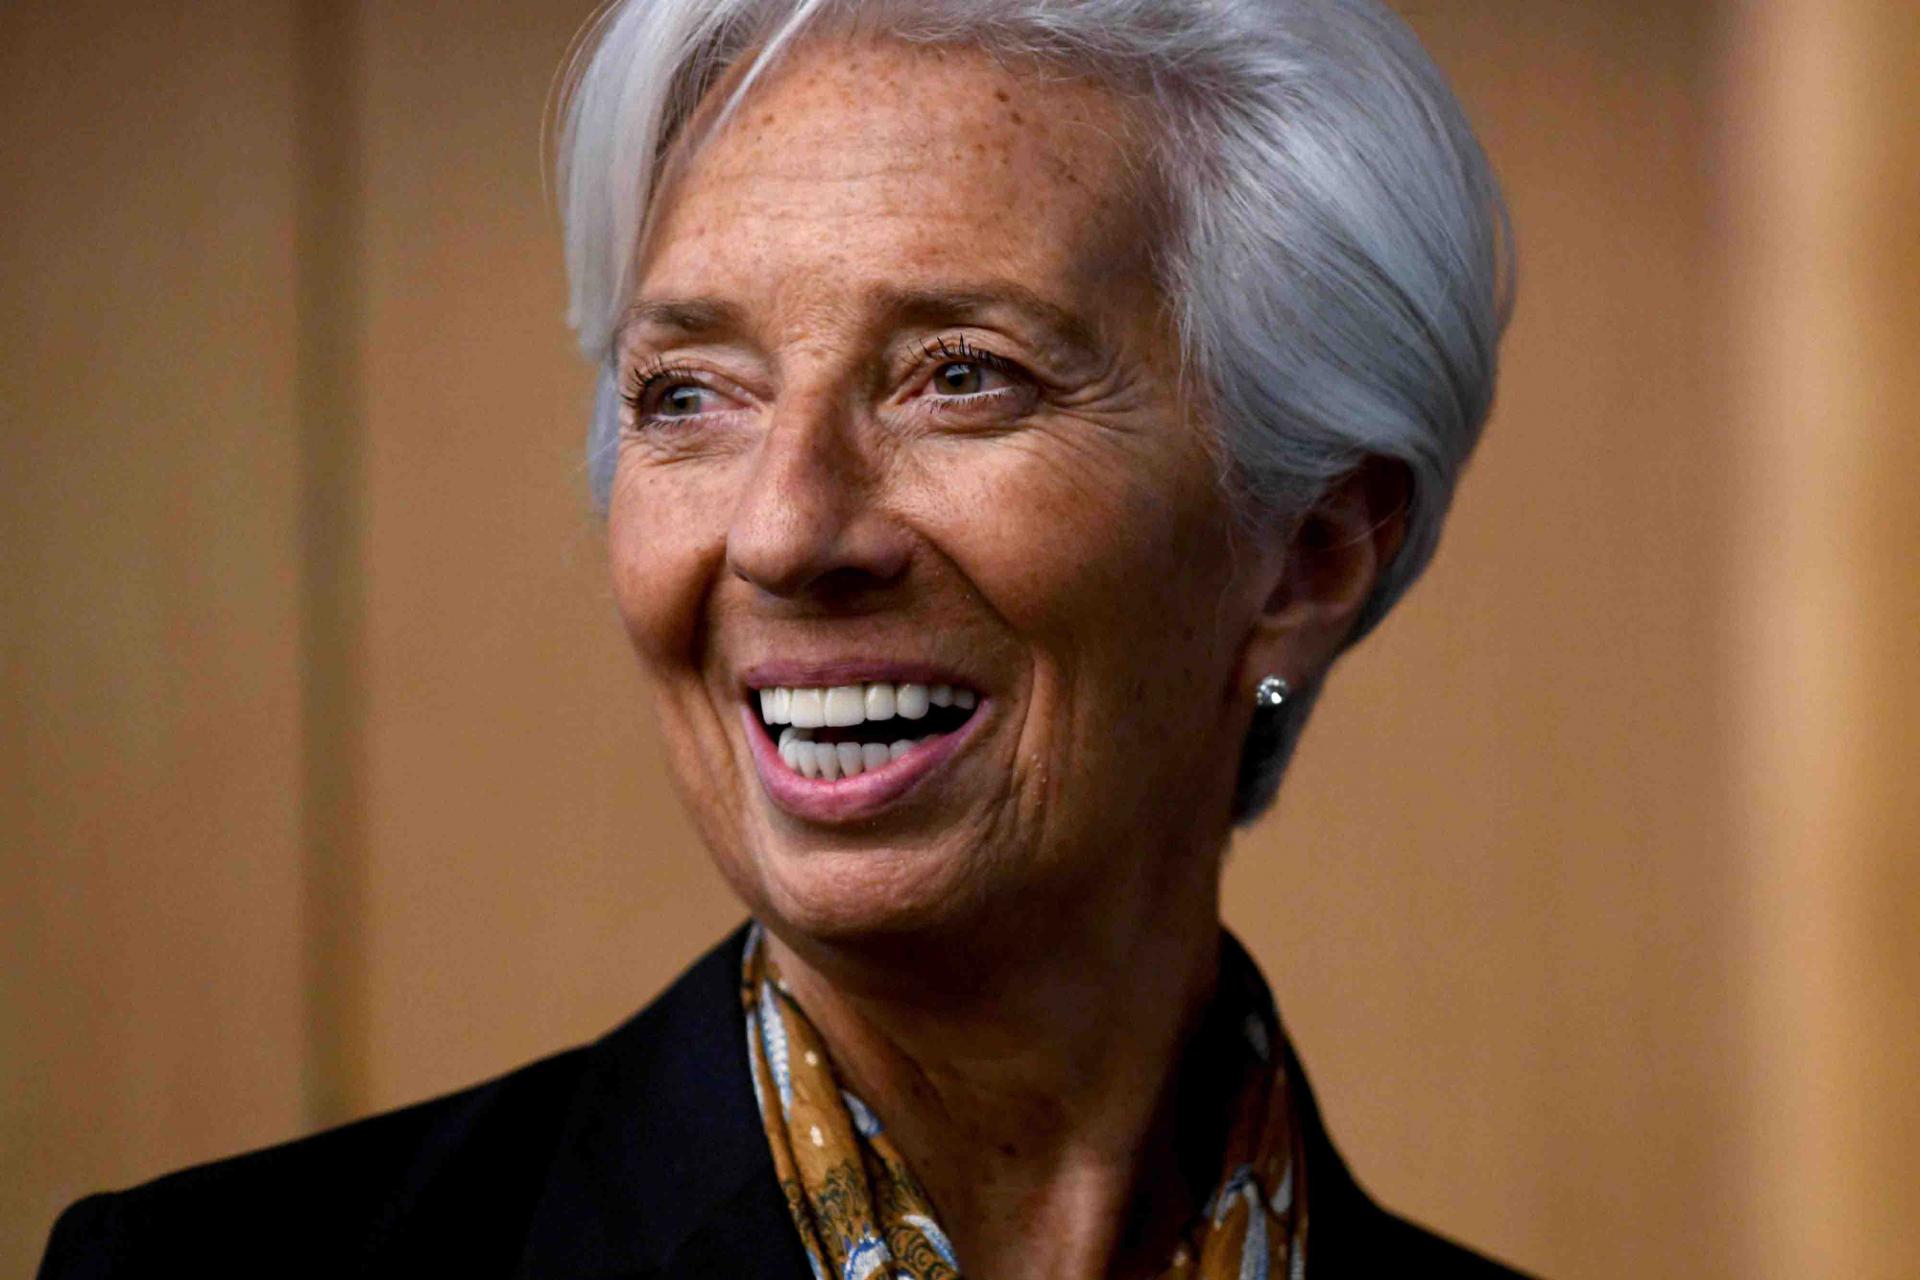 The IMF chief is attending a conference in Bahrain to discuss the economic aspects of a United States plan for Israeli-Palestinian peace